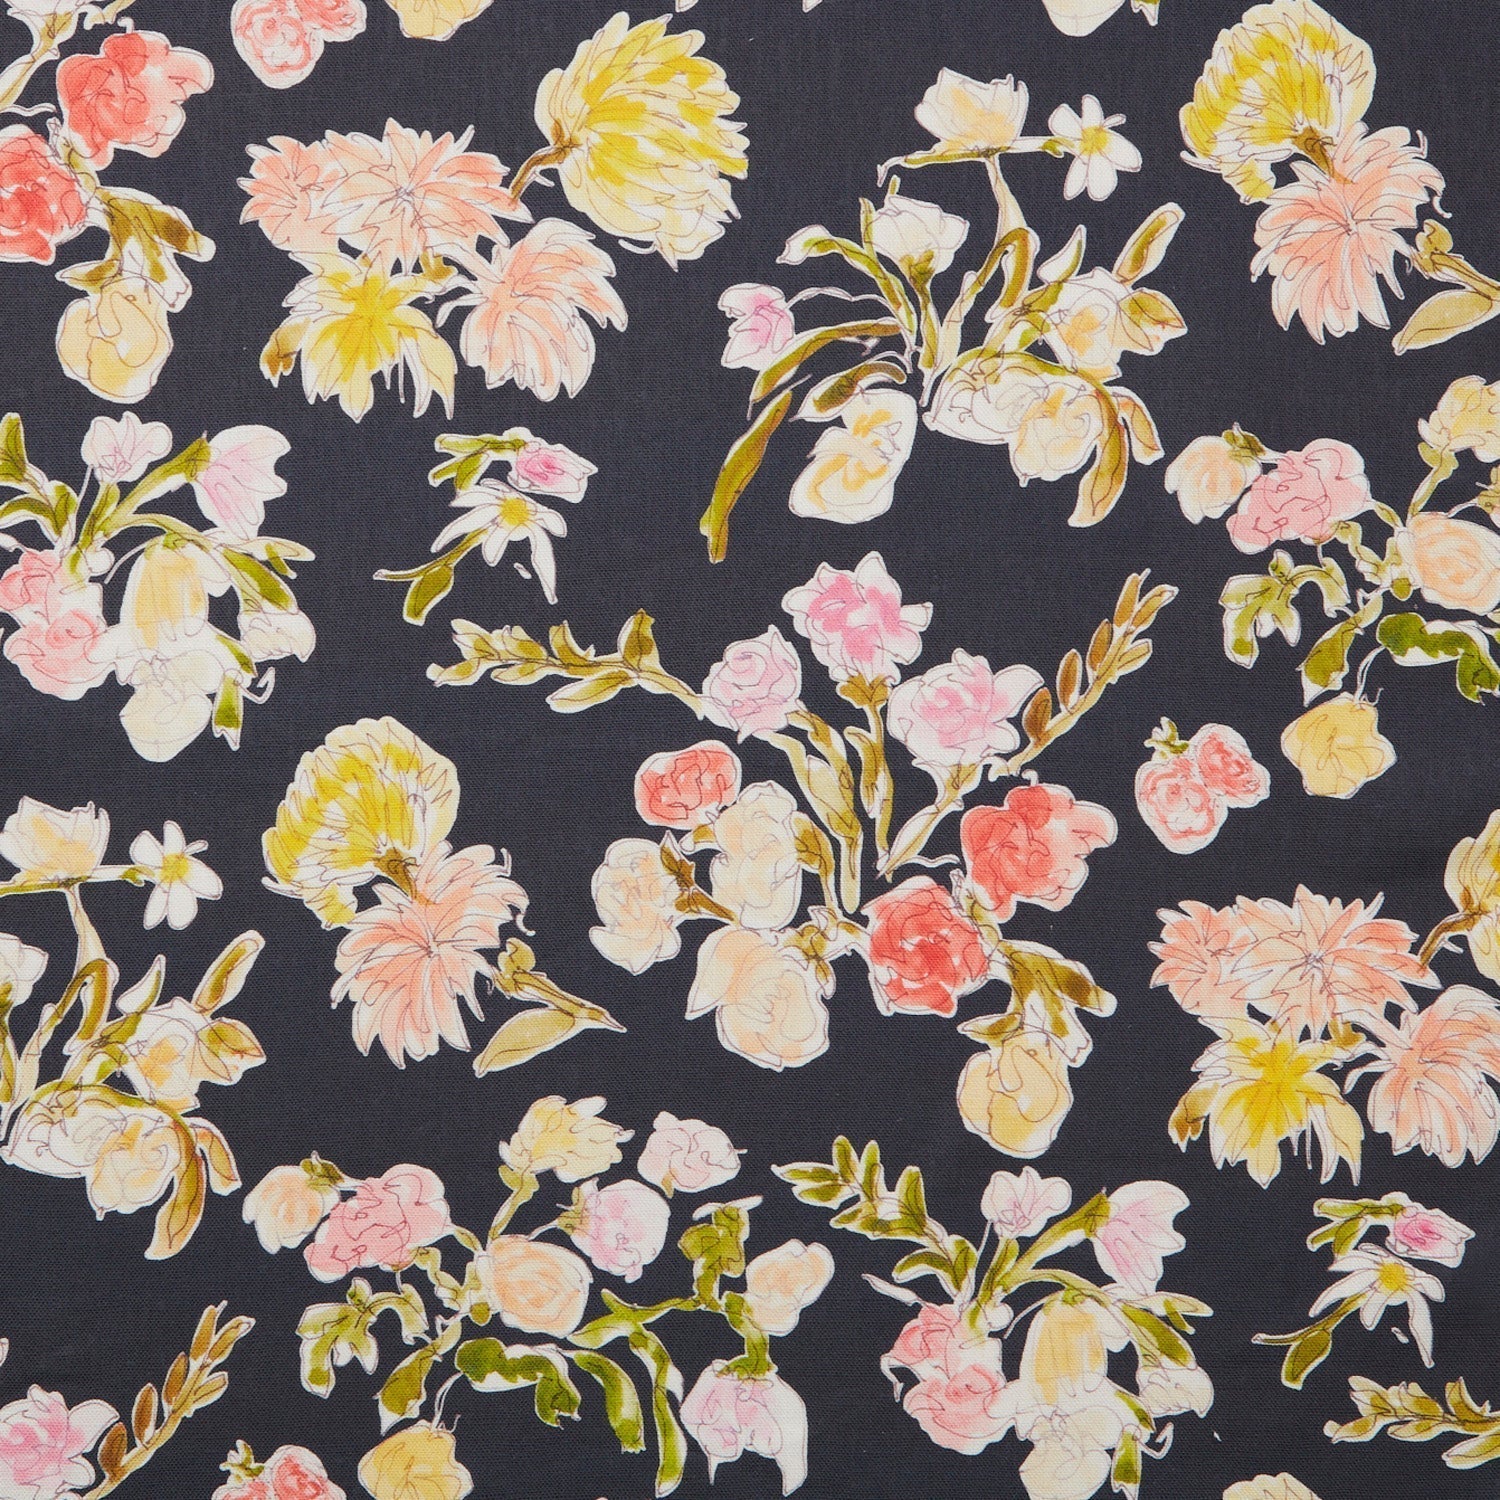 Linen swatch with a pattern of large-scale line-drawn flowers in gray ink with red, pink and yellow watercolors, on a black background.